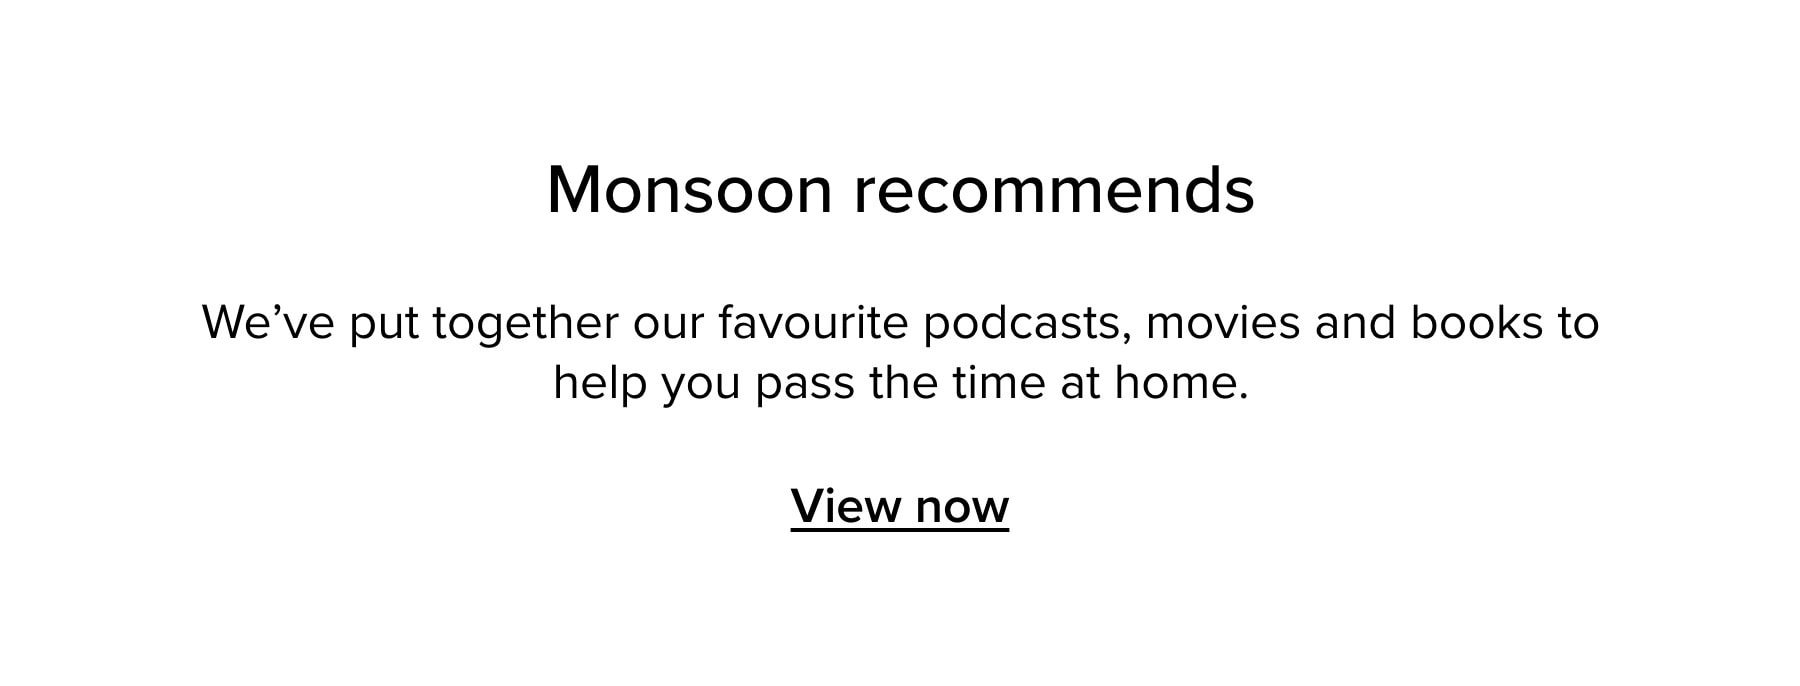 Monsoon Recommends Blog Post